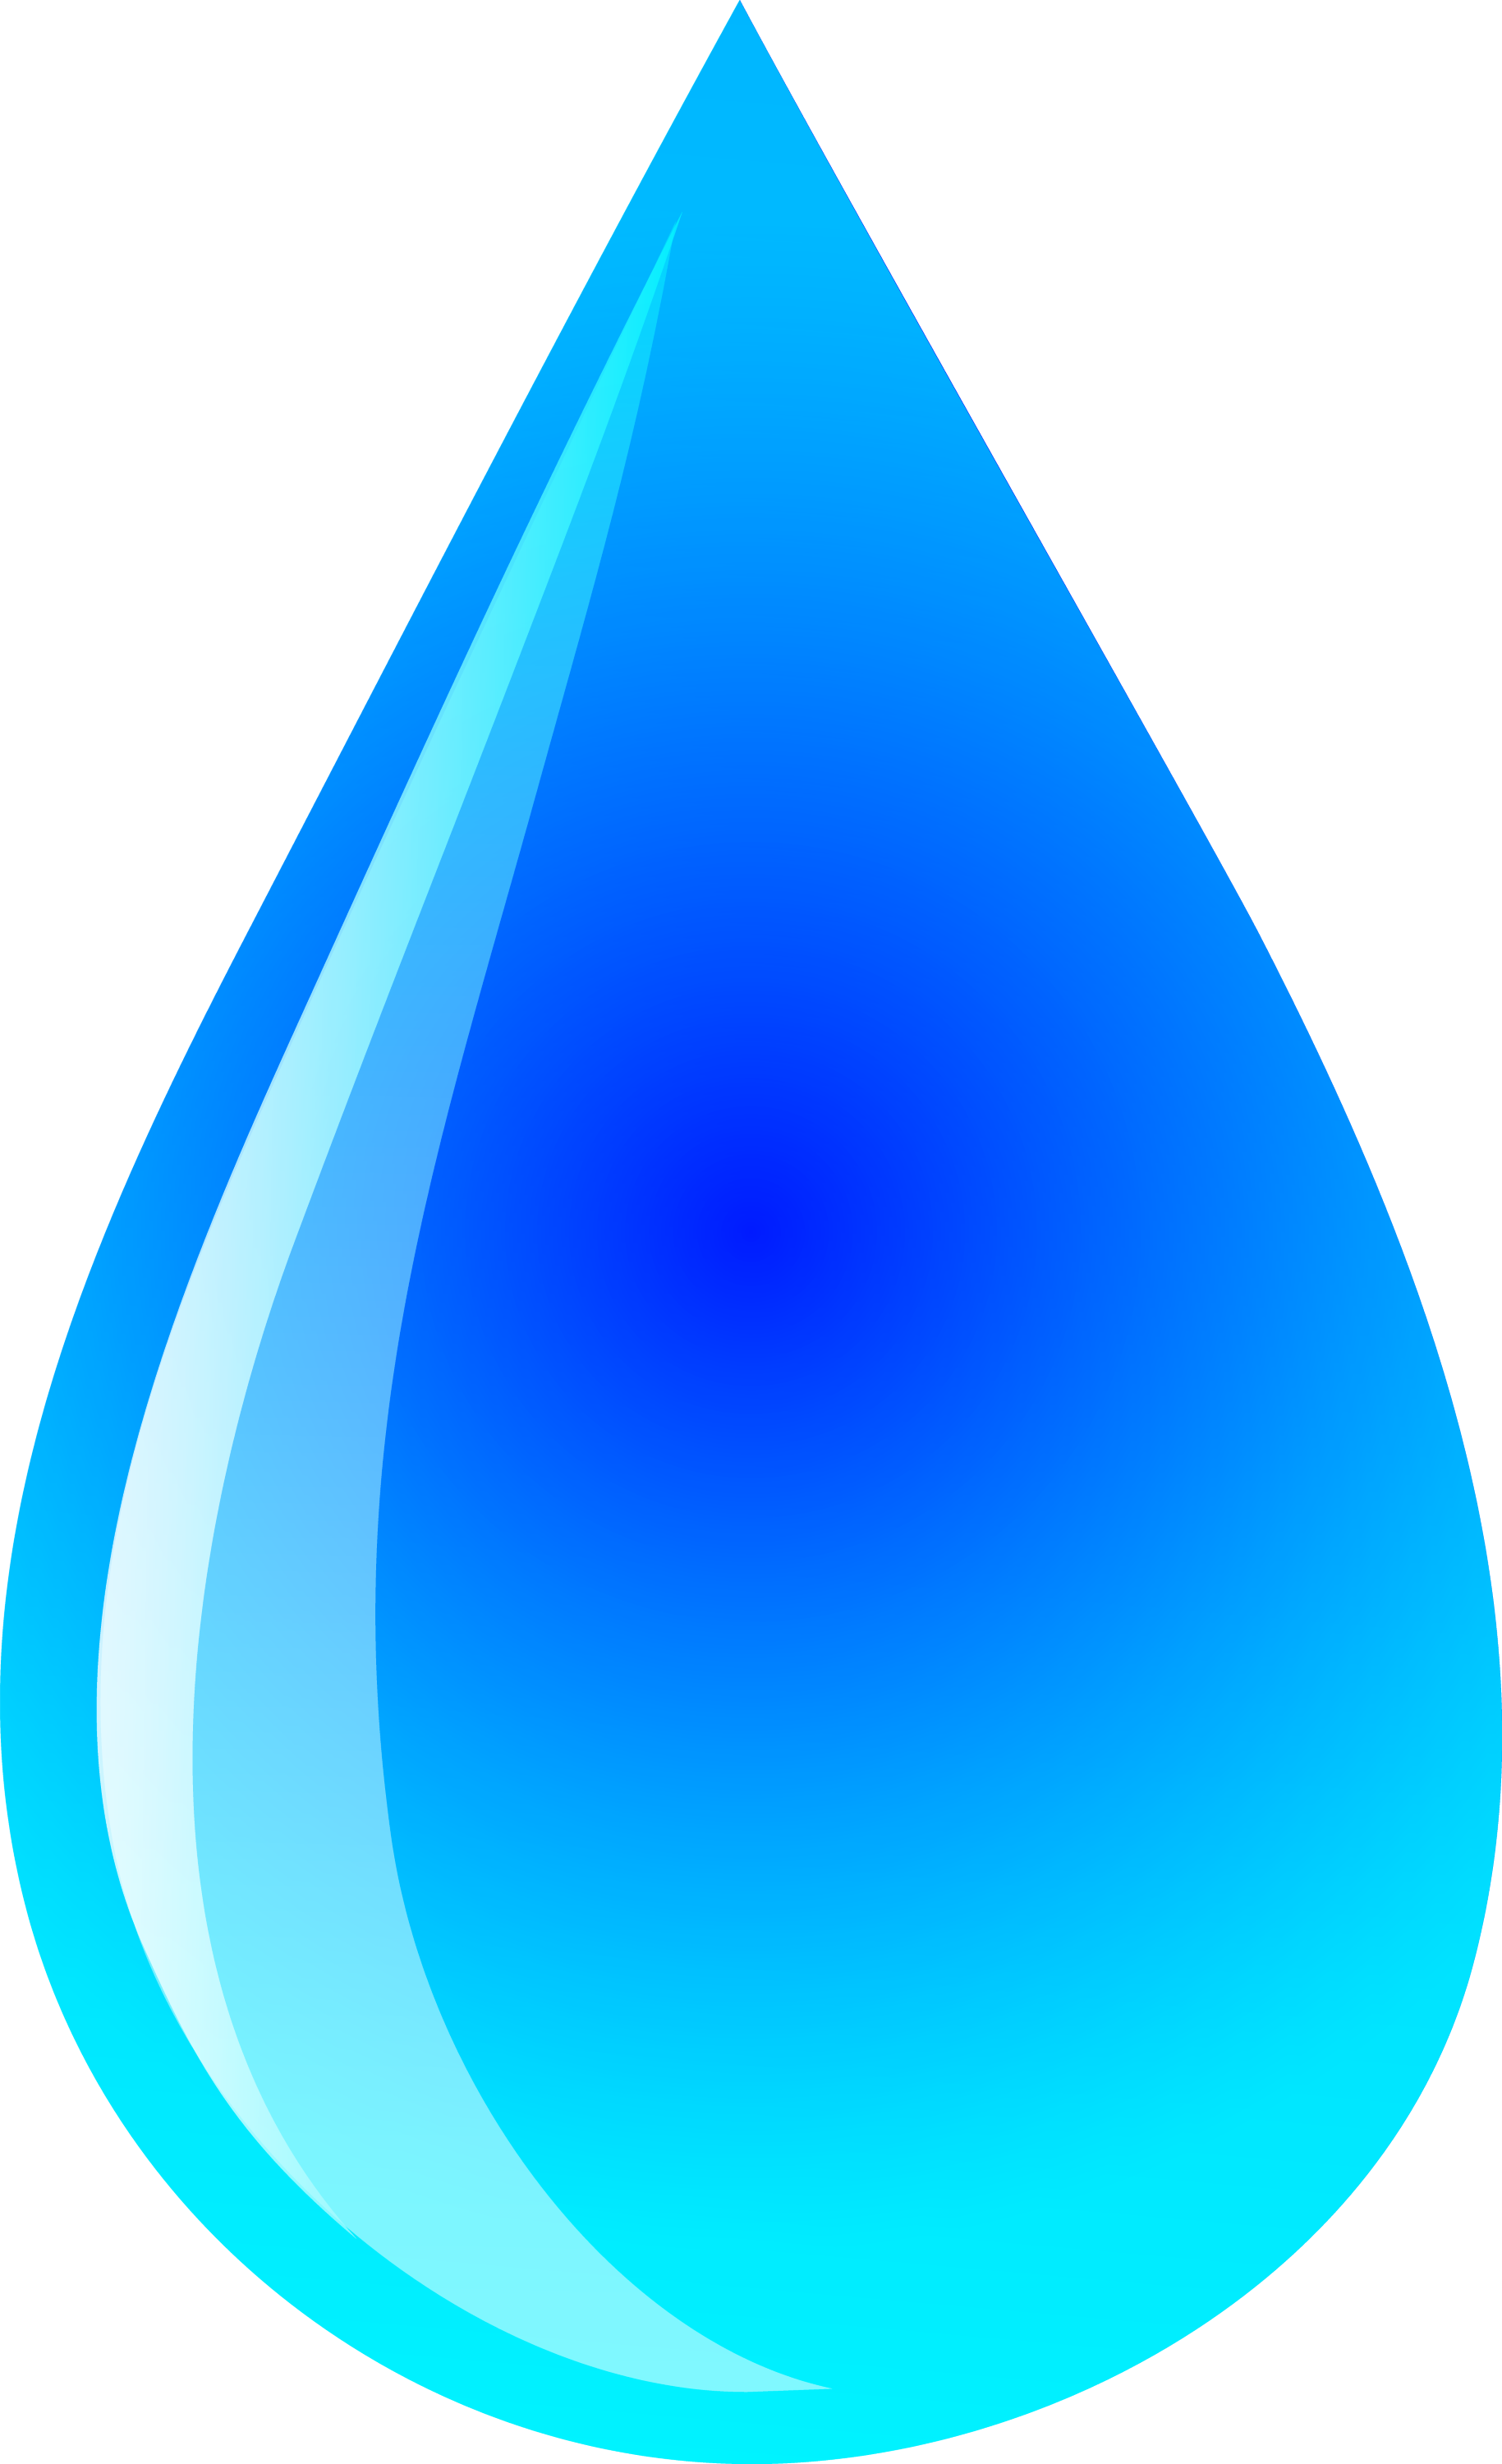 Svg Animation Water Drop : Free download of Water Drop Animated GIF